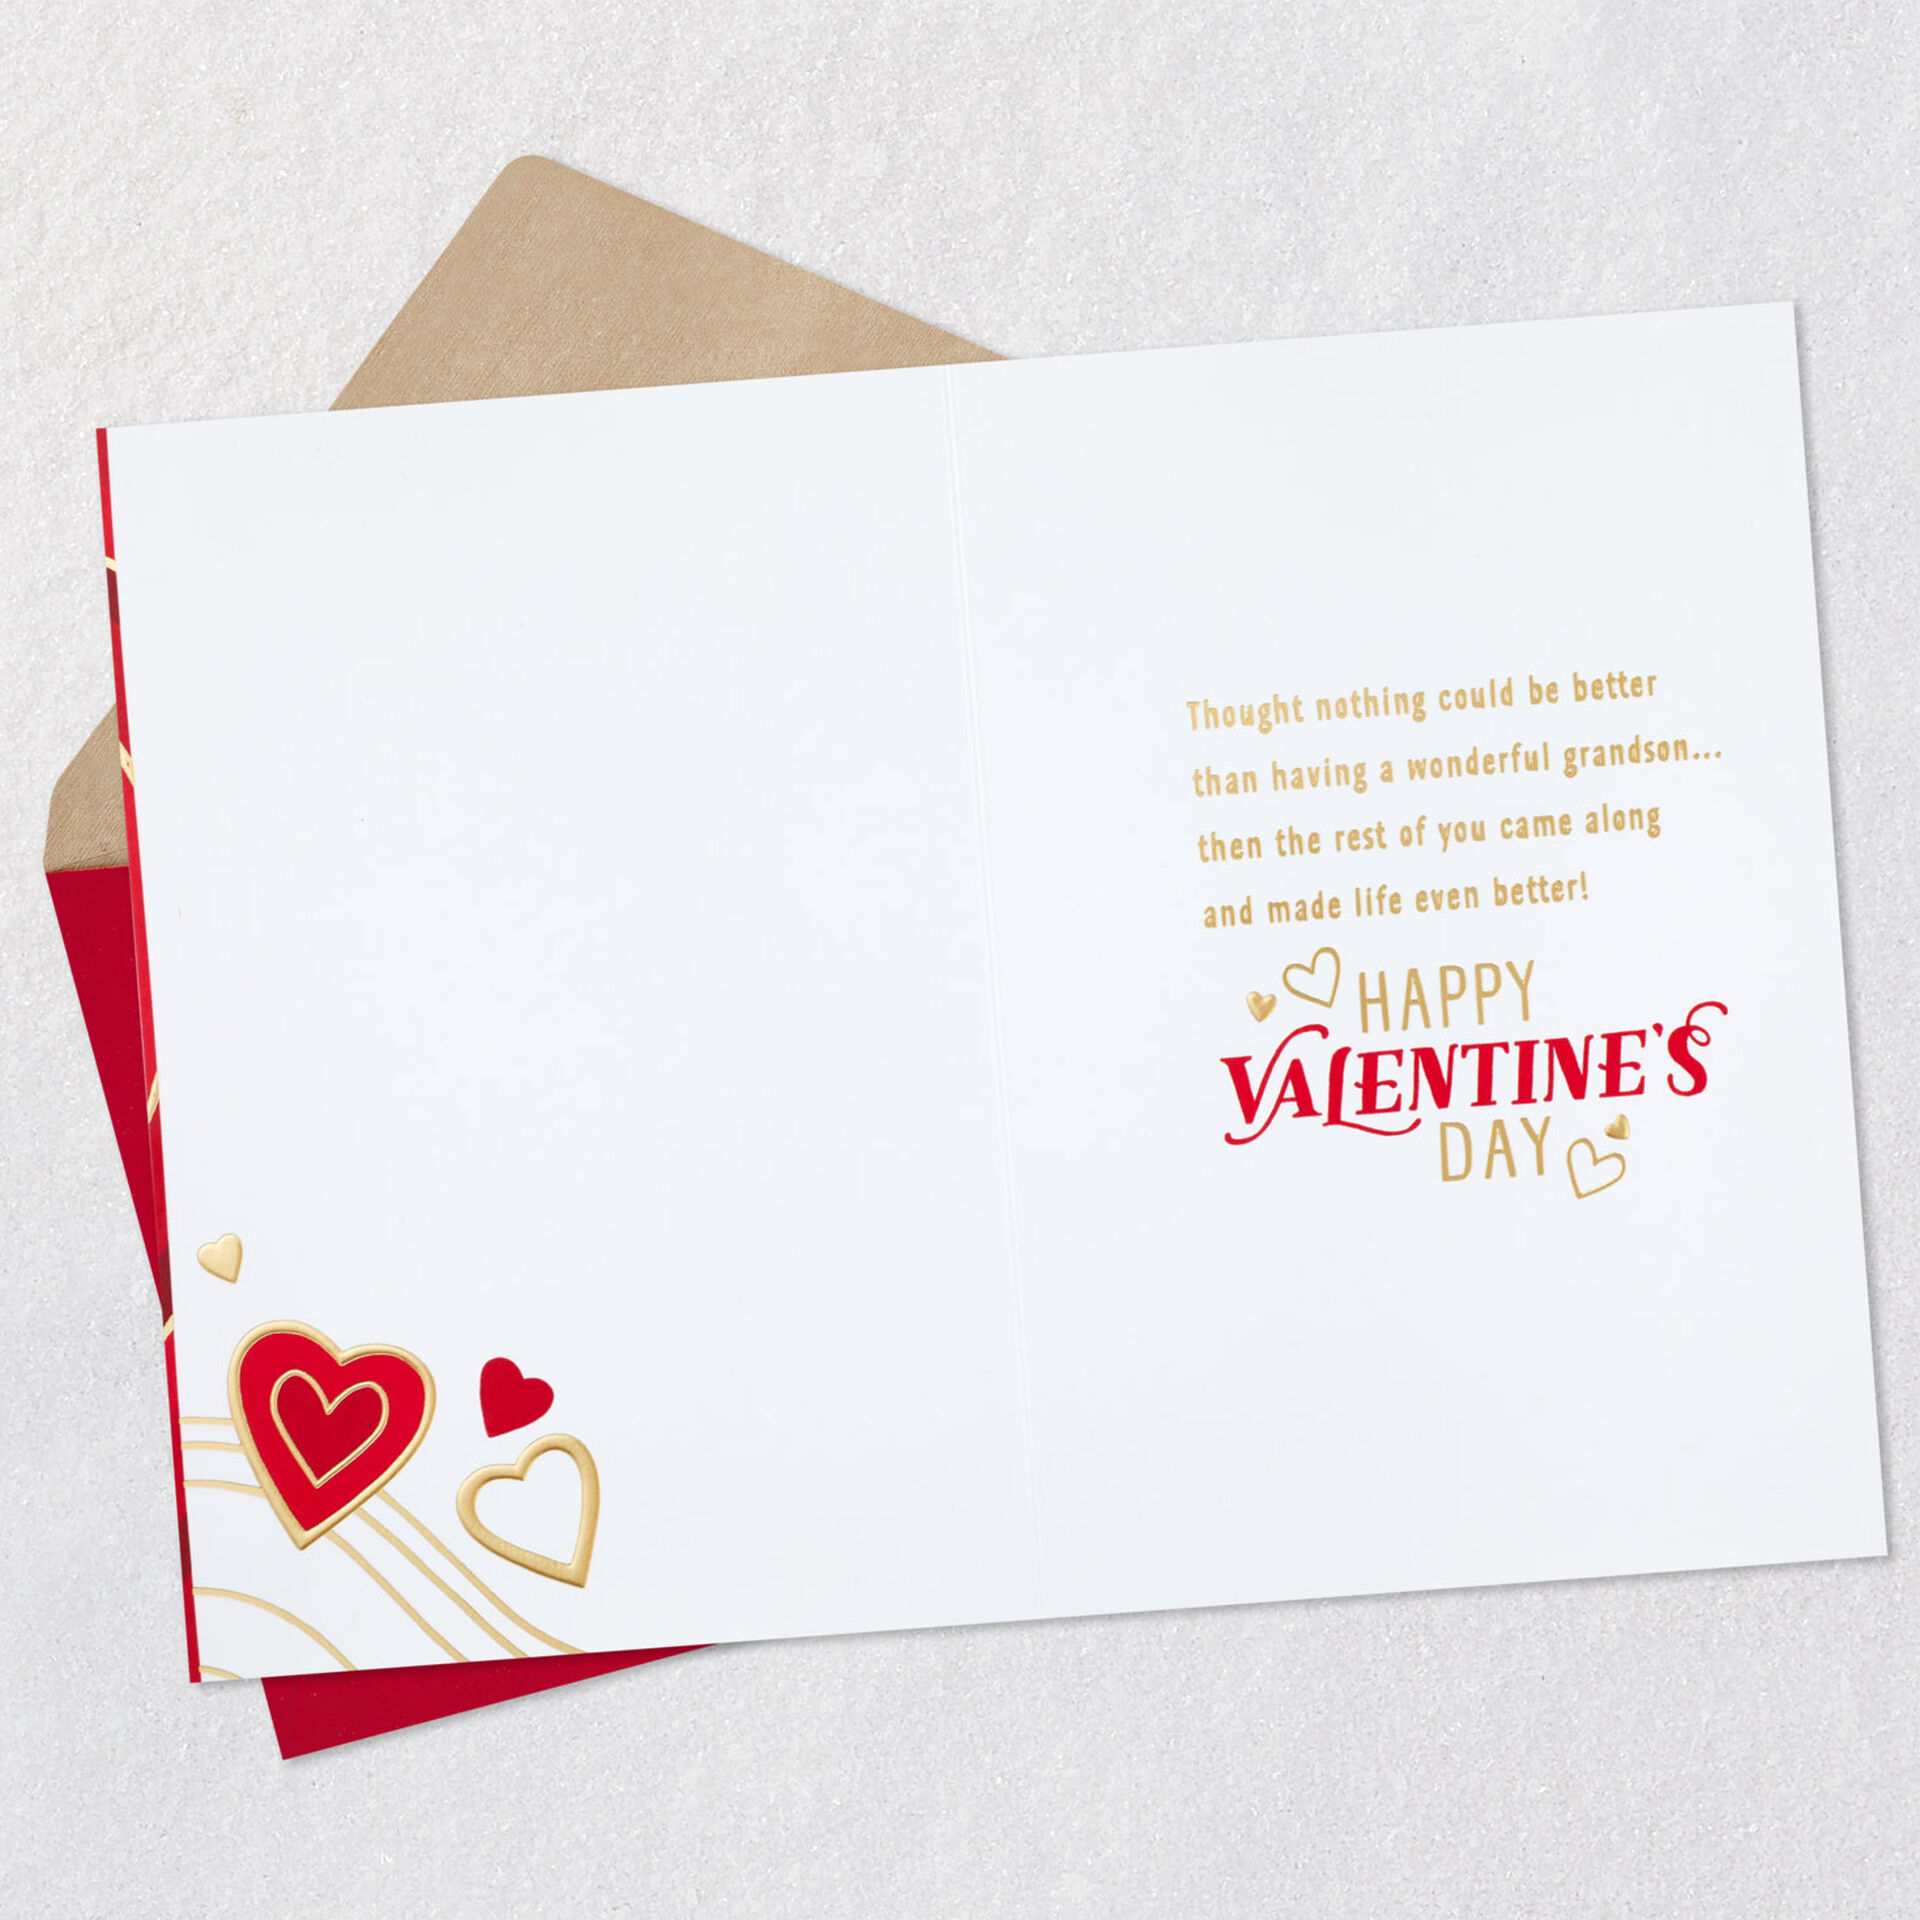 Hearts-Valentines-Day-Card-for-Grandson-and-Family_299V4099_03